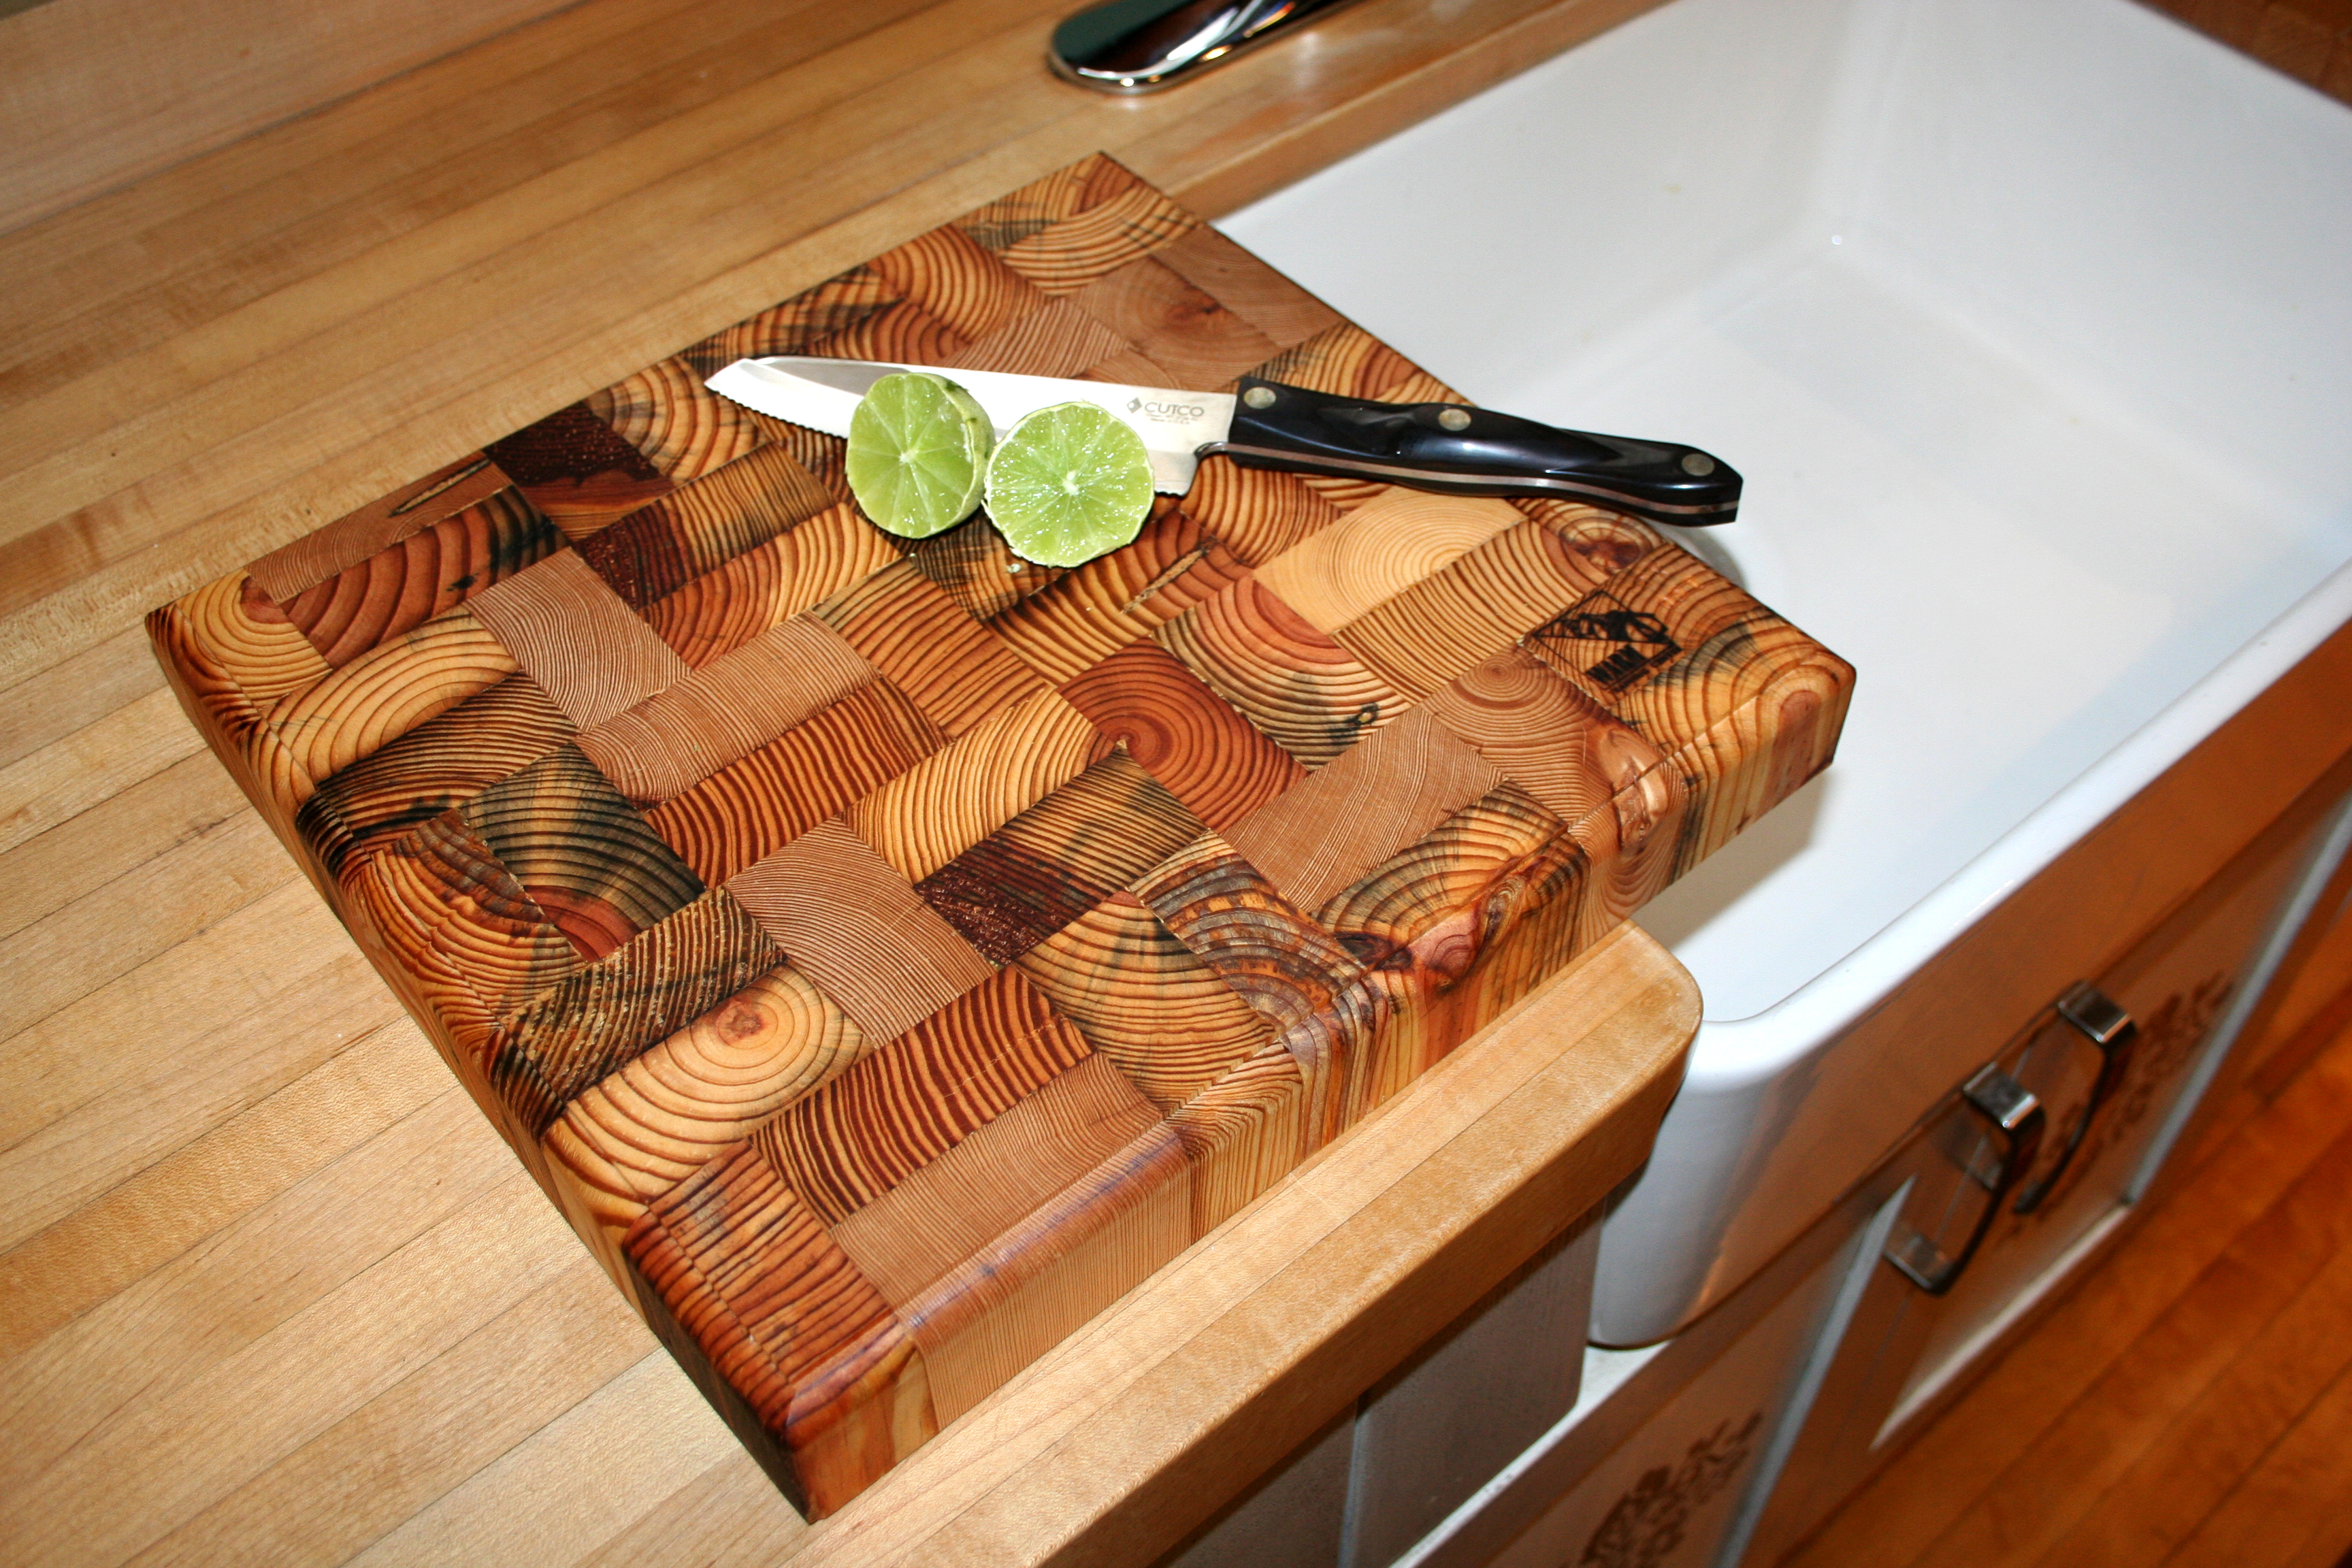 Check out these awesome cutting boards!!